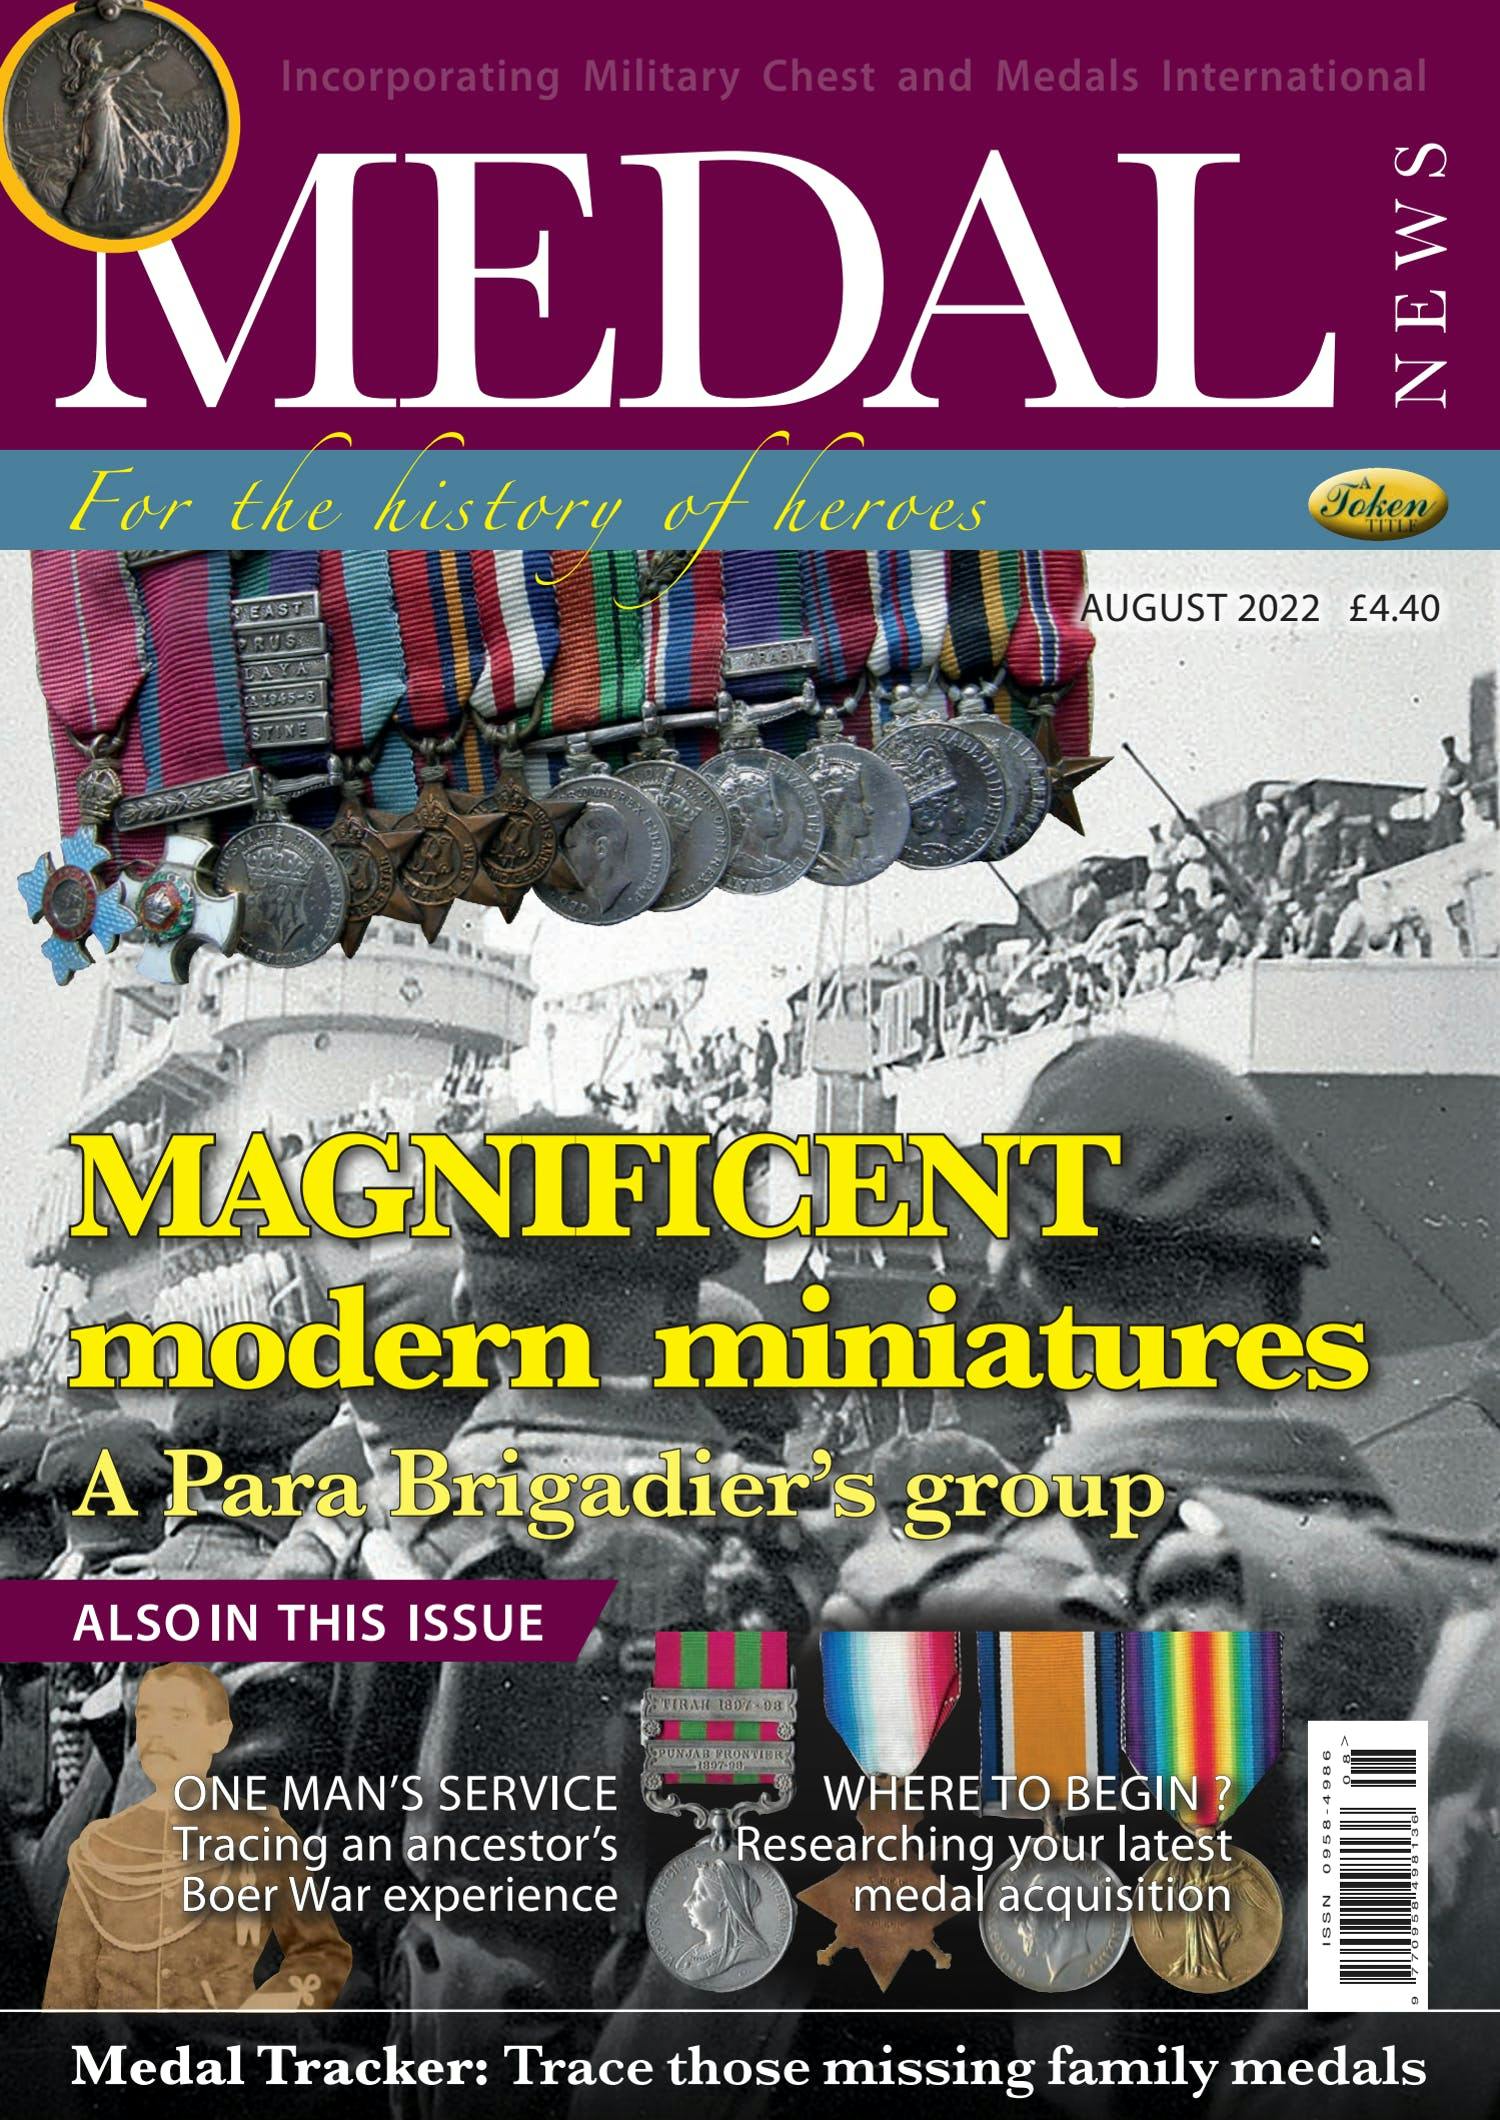 The front cover of Medal News, Volume 60, Number 7, August 2022